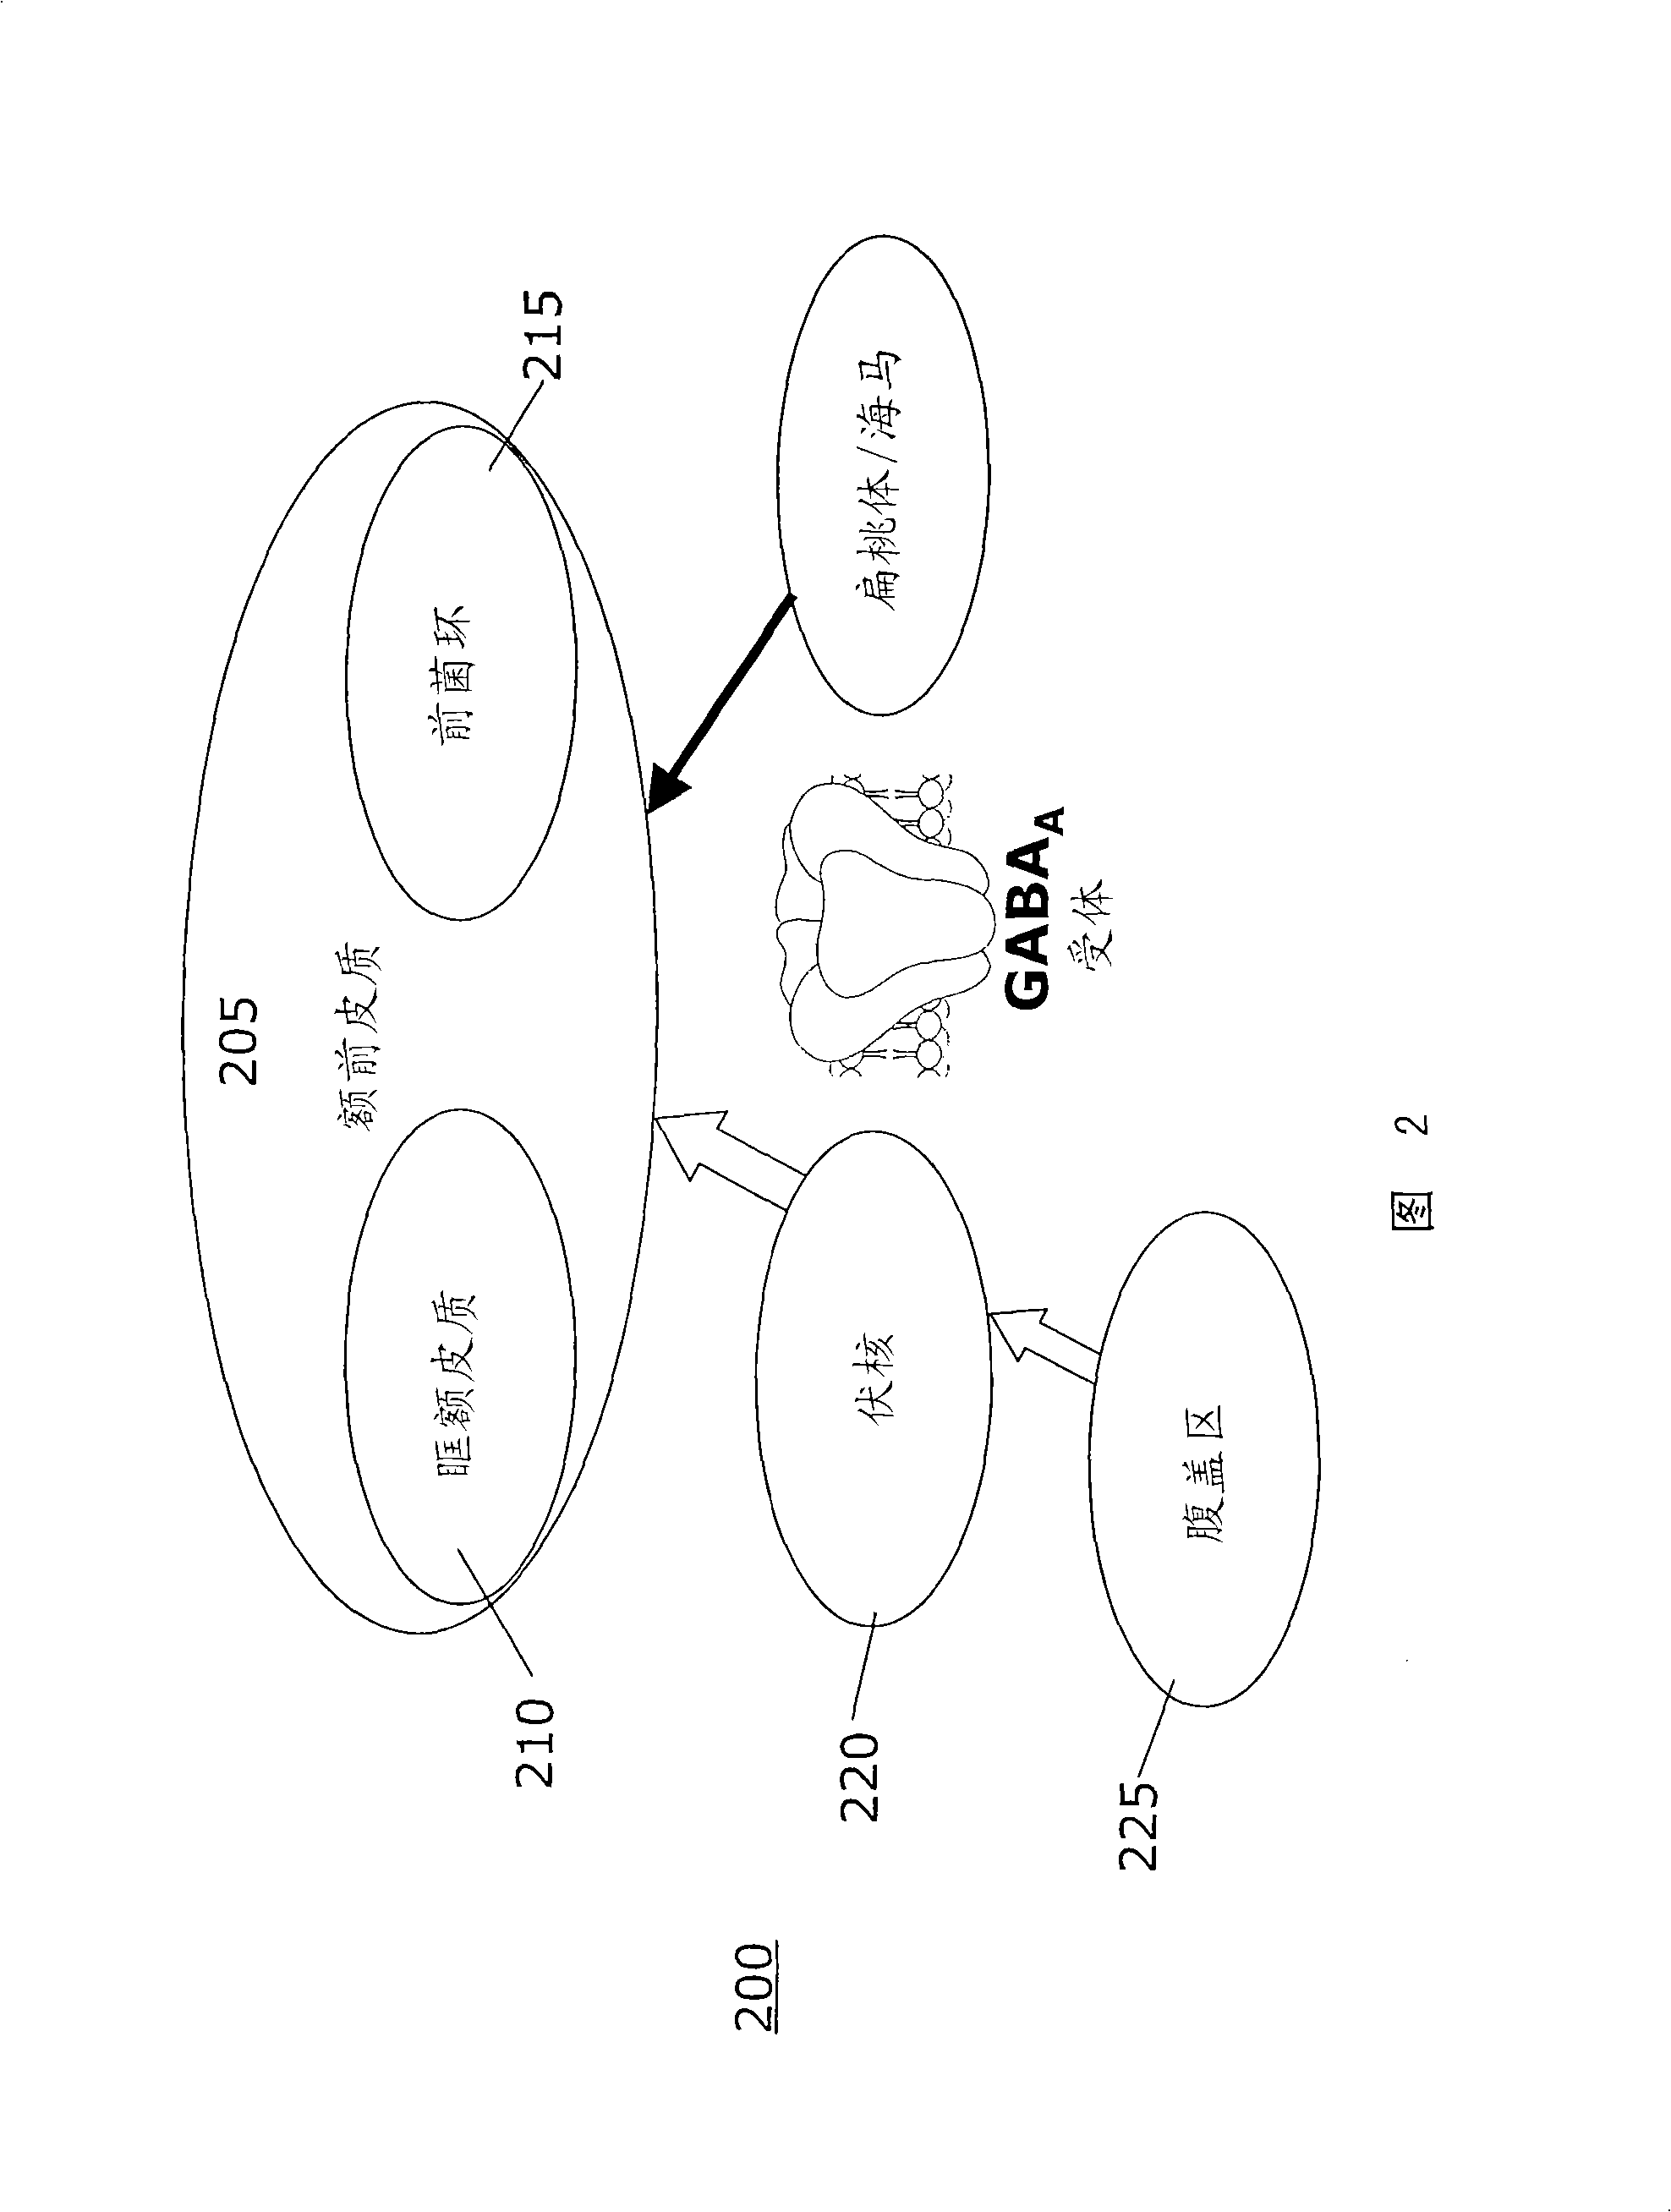 Methods for the treatment of substance abuse and dependence